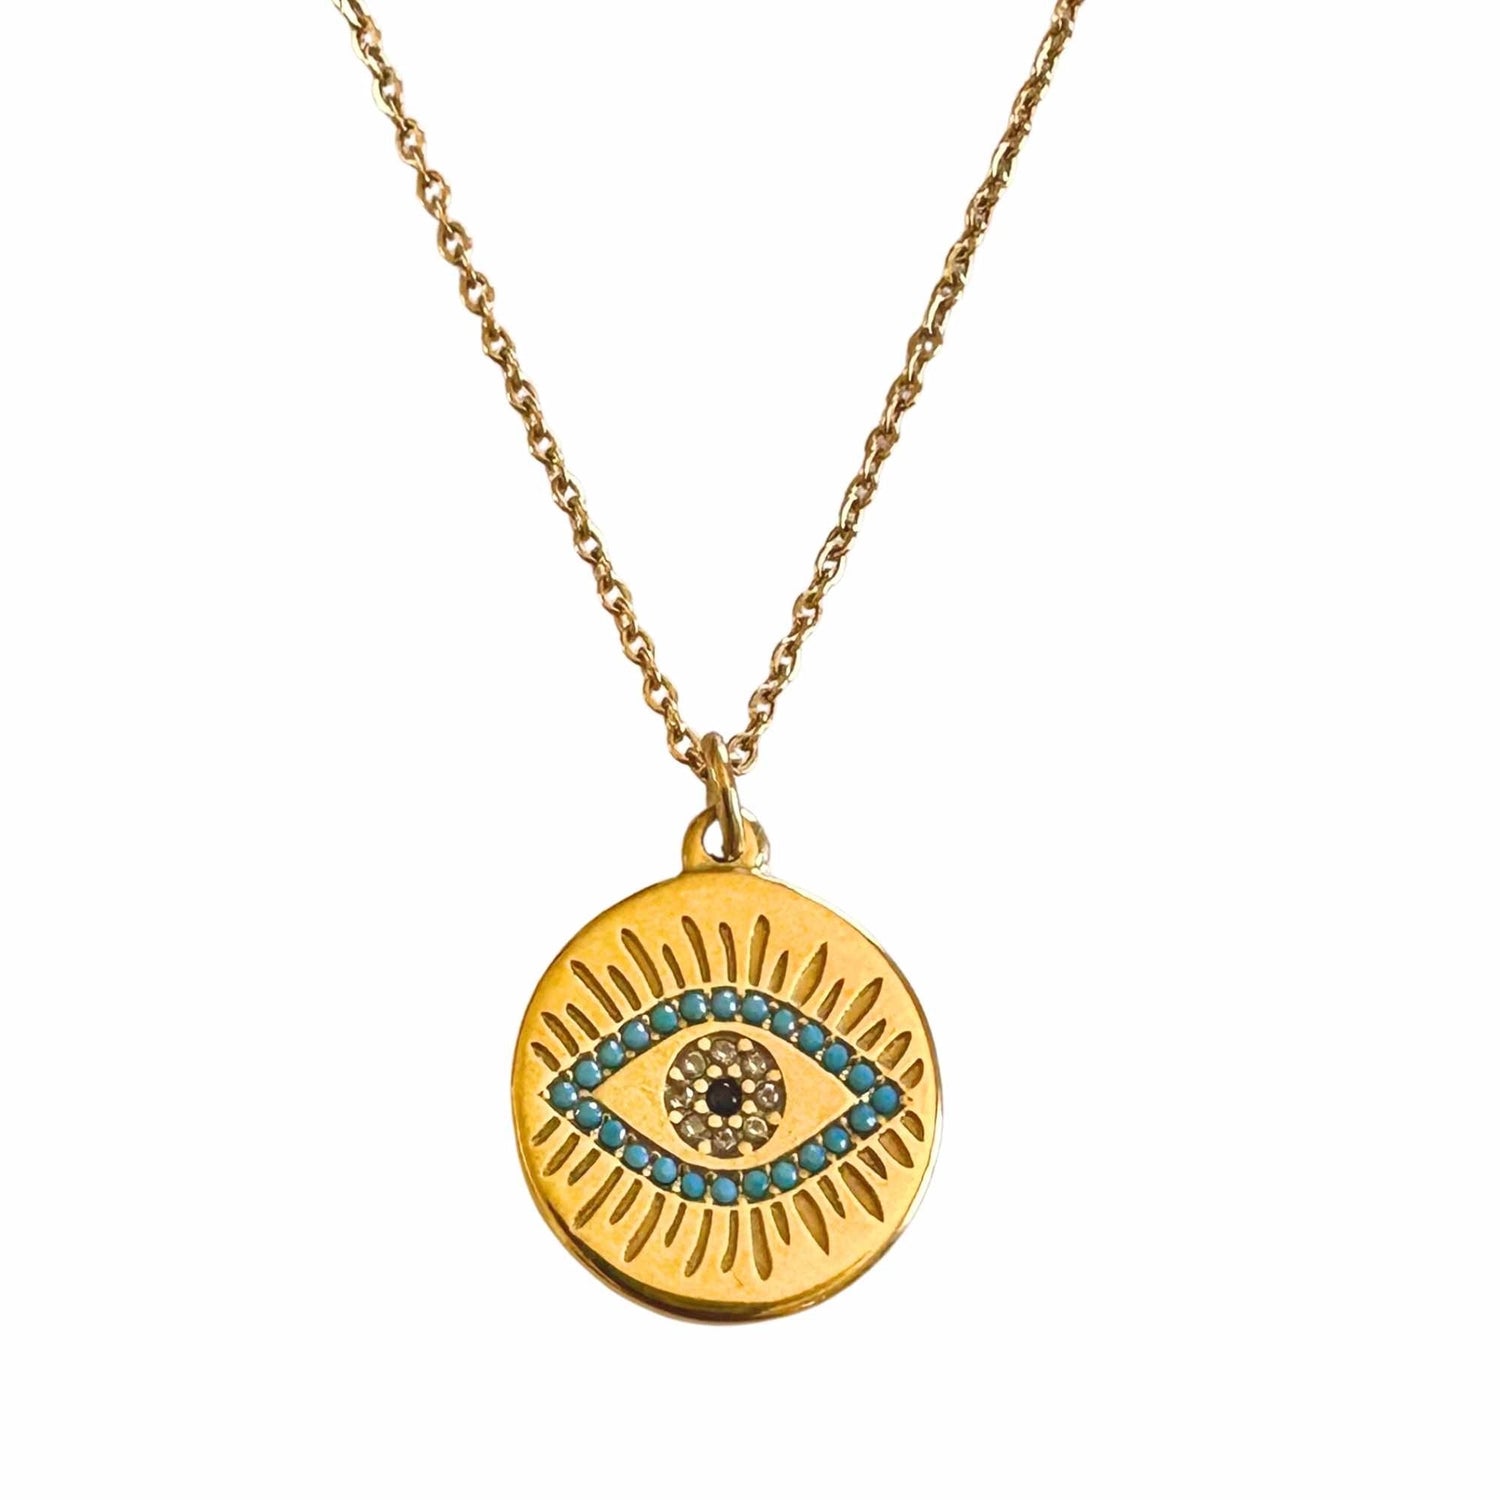 Shimmering Evil Eye Necklace - Moon Room Shop and Wellness